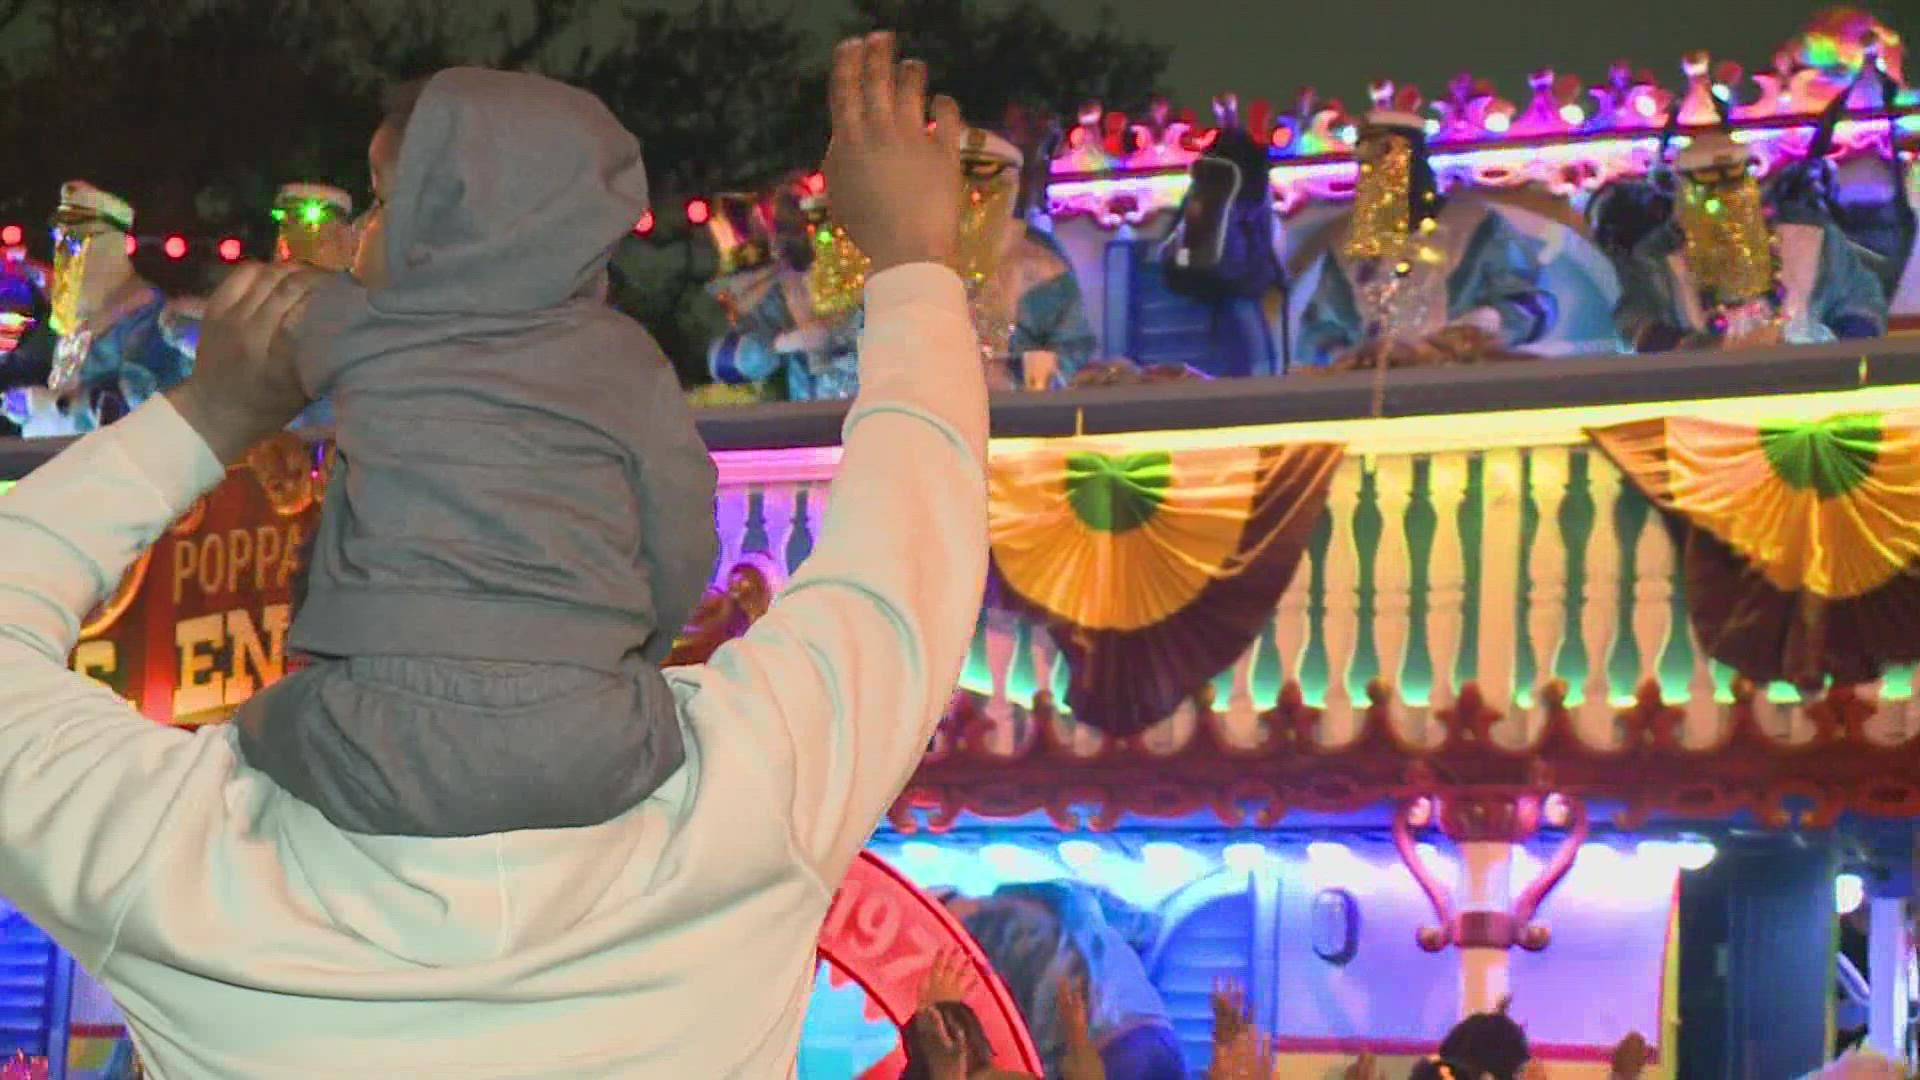 It was just over two years ago that Endymion last rolled on the parade route and that one was cut short, so, a large crowd was excited it was back.